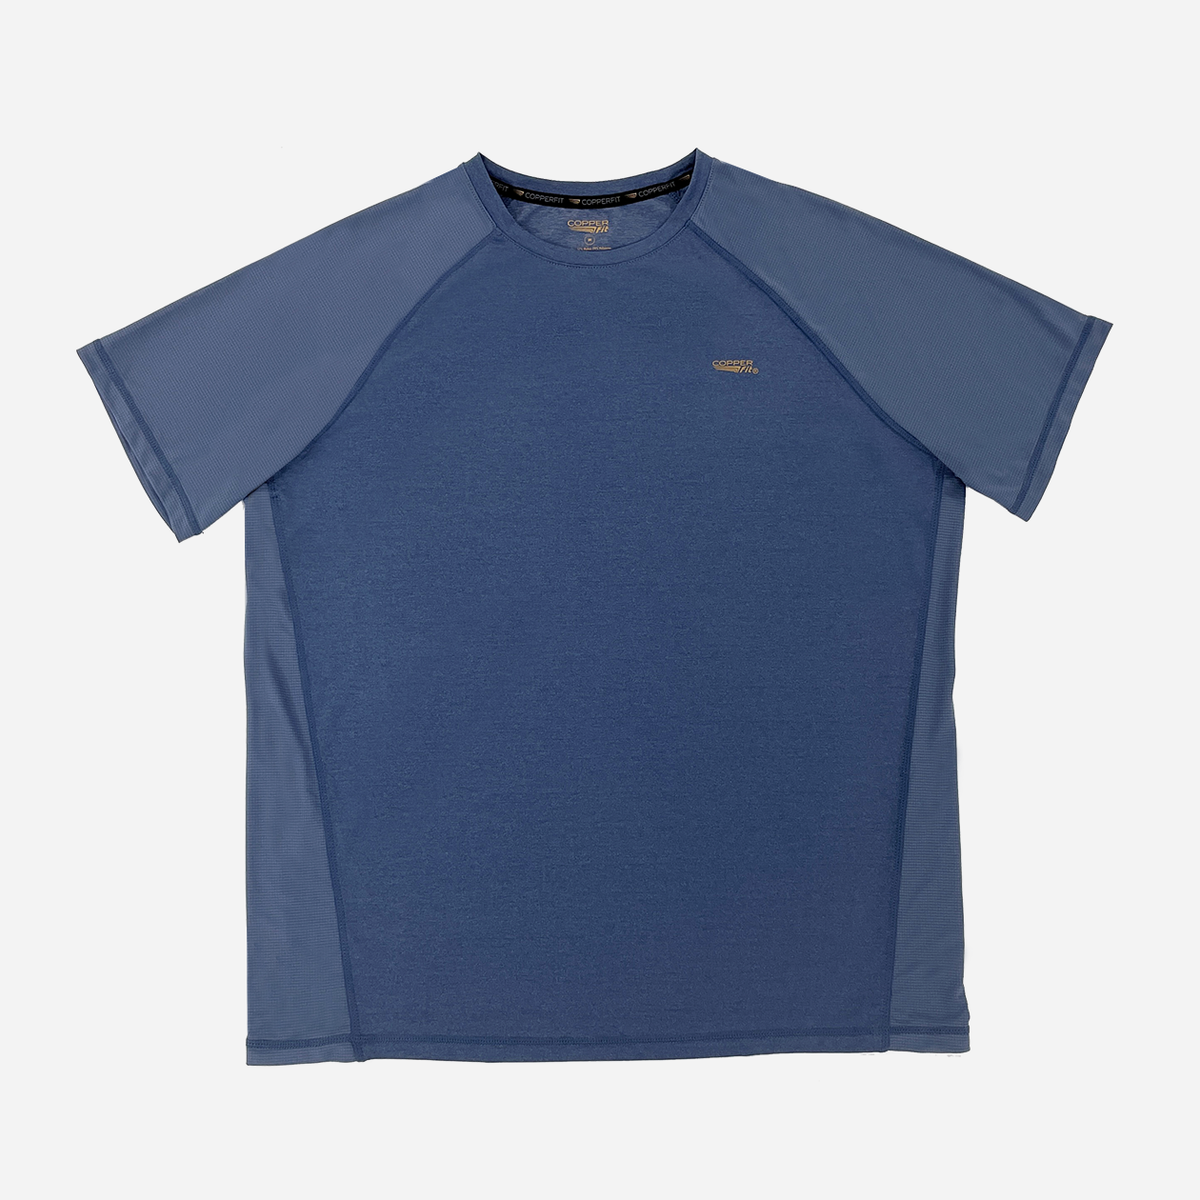 Crew Neck Short-Sleeve Performance T-Shirts - Copper Fit